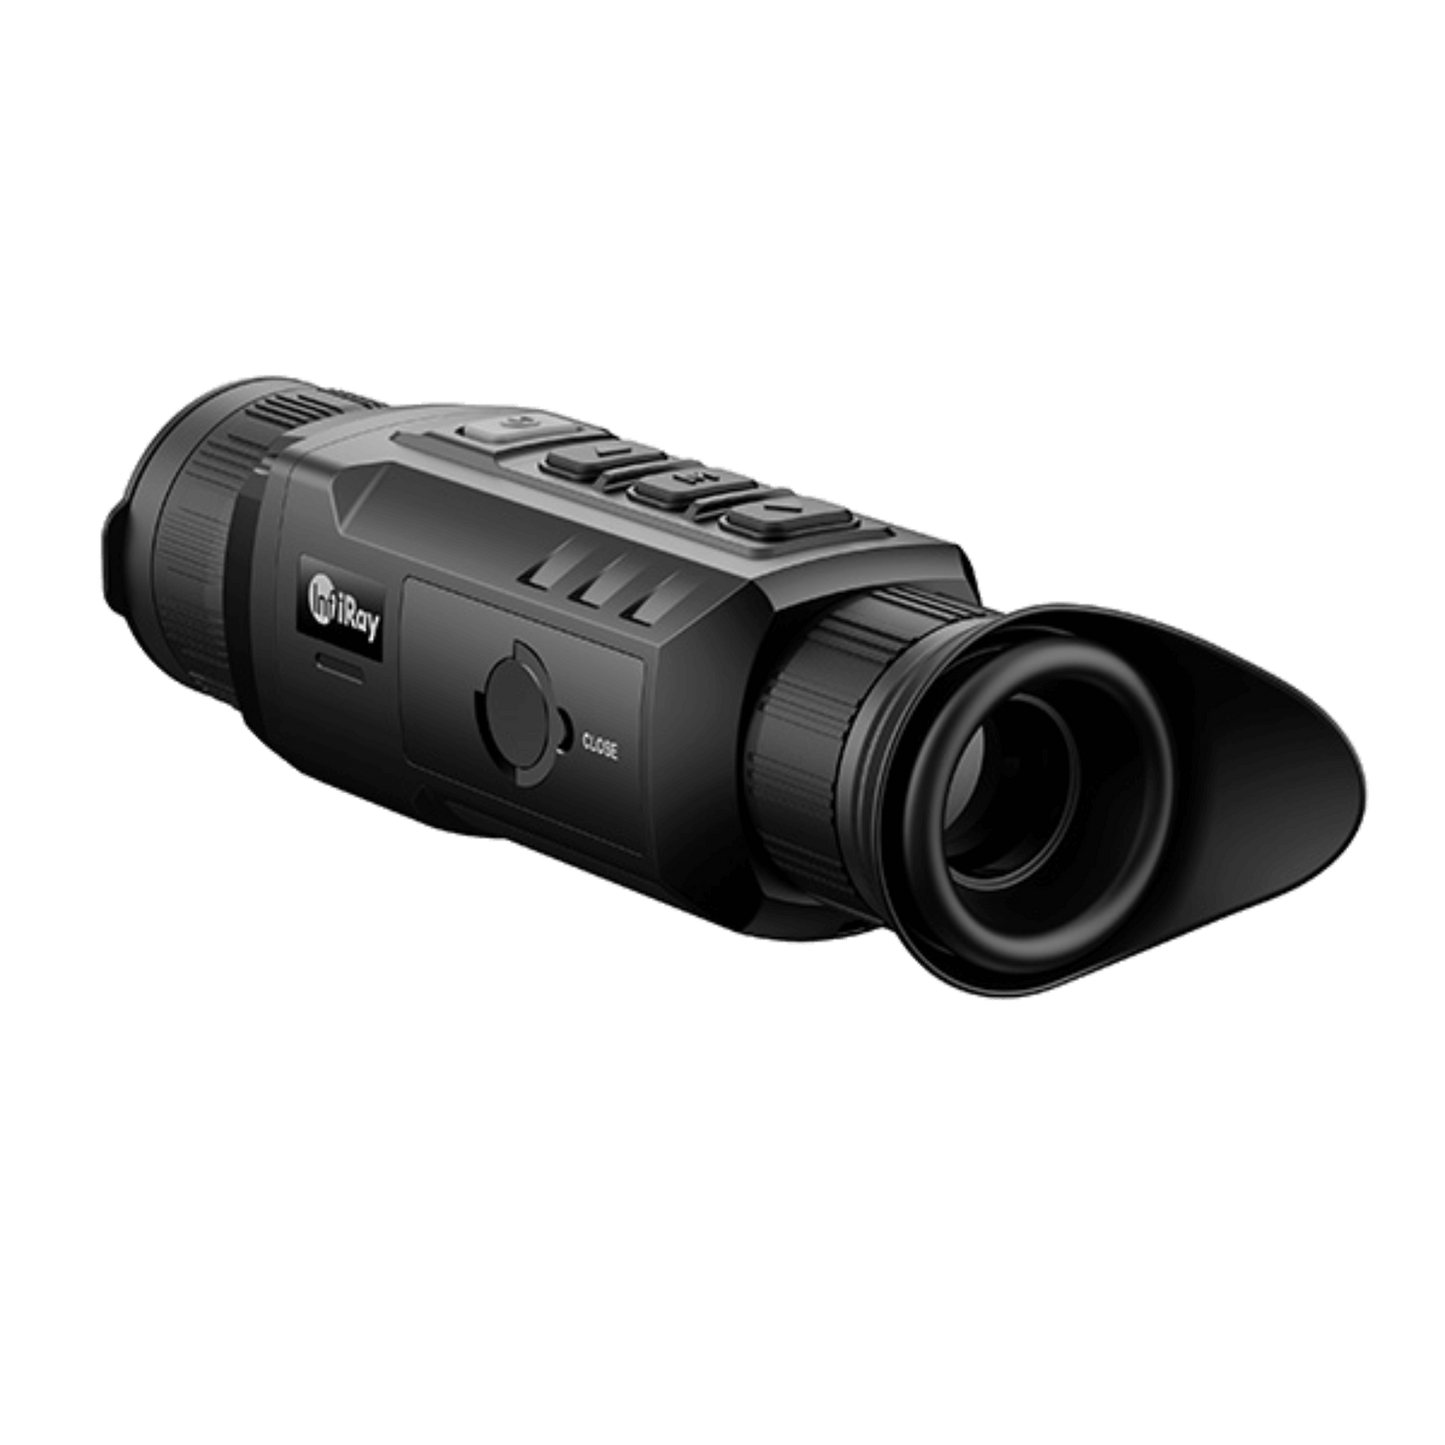 Cape Thermal - The best thermal imaging monoculars for sale - Infiray Zoom Series ZH38 Handheld thermal imaging monocular - Back view